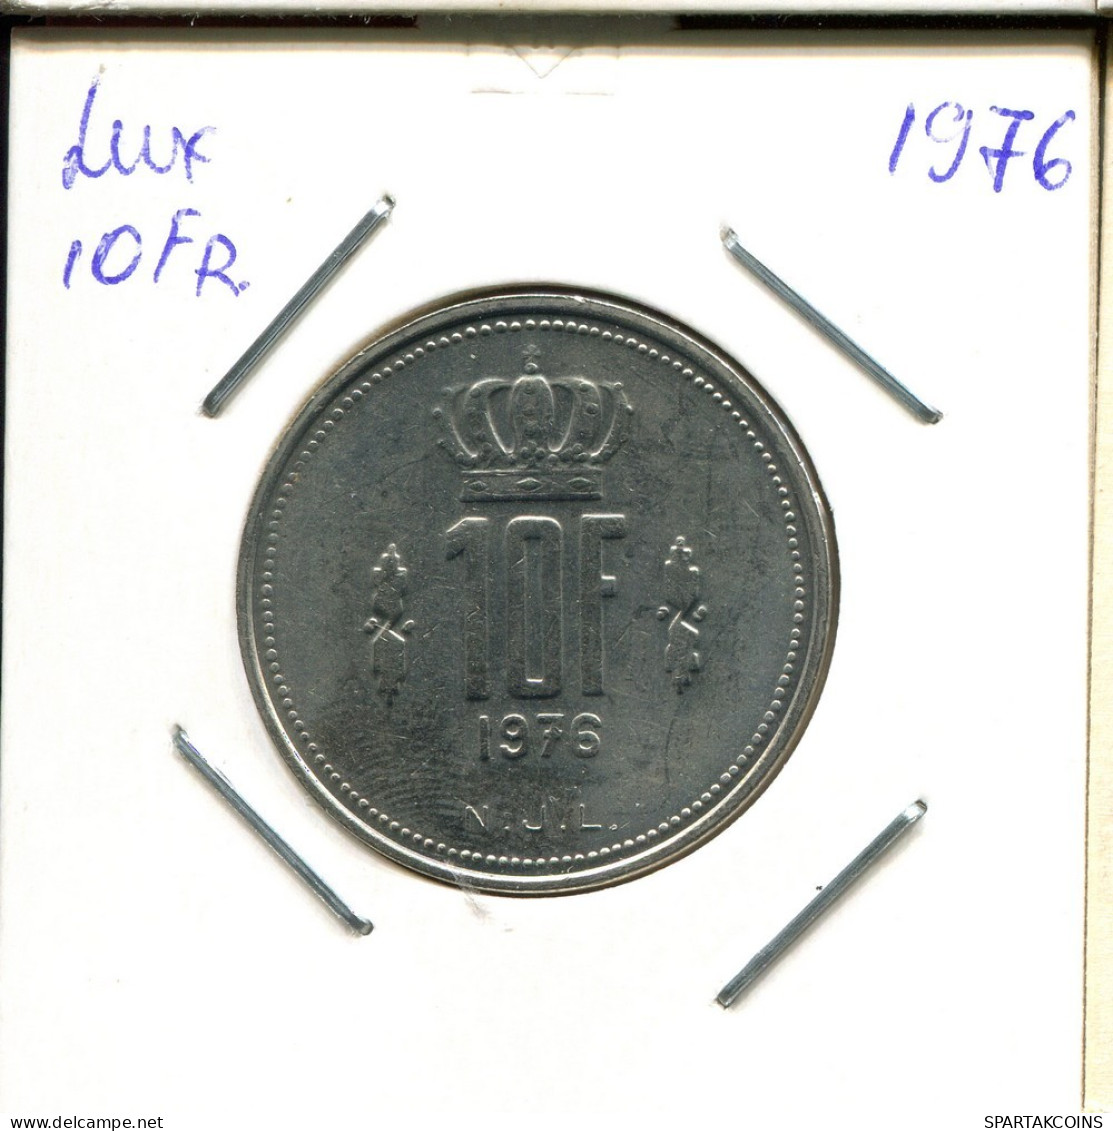 10 FRANCS 1976 LUXEMBURGO LUXEMBOURG Moneda #AT241.E.A - Luxembourg